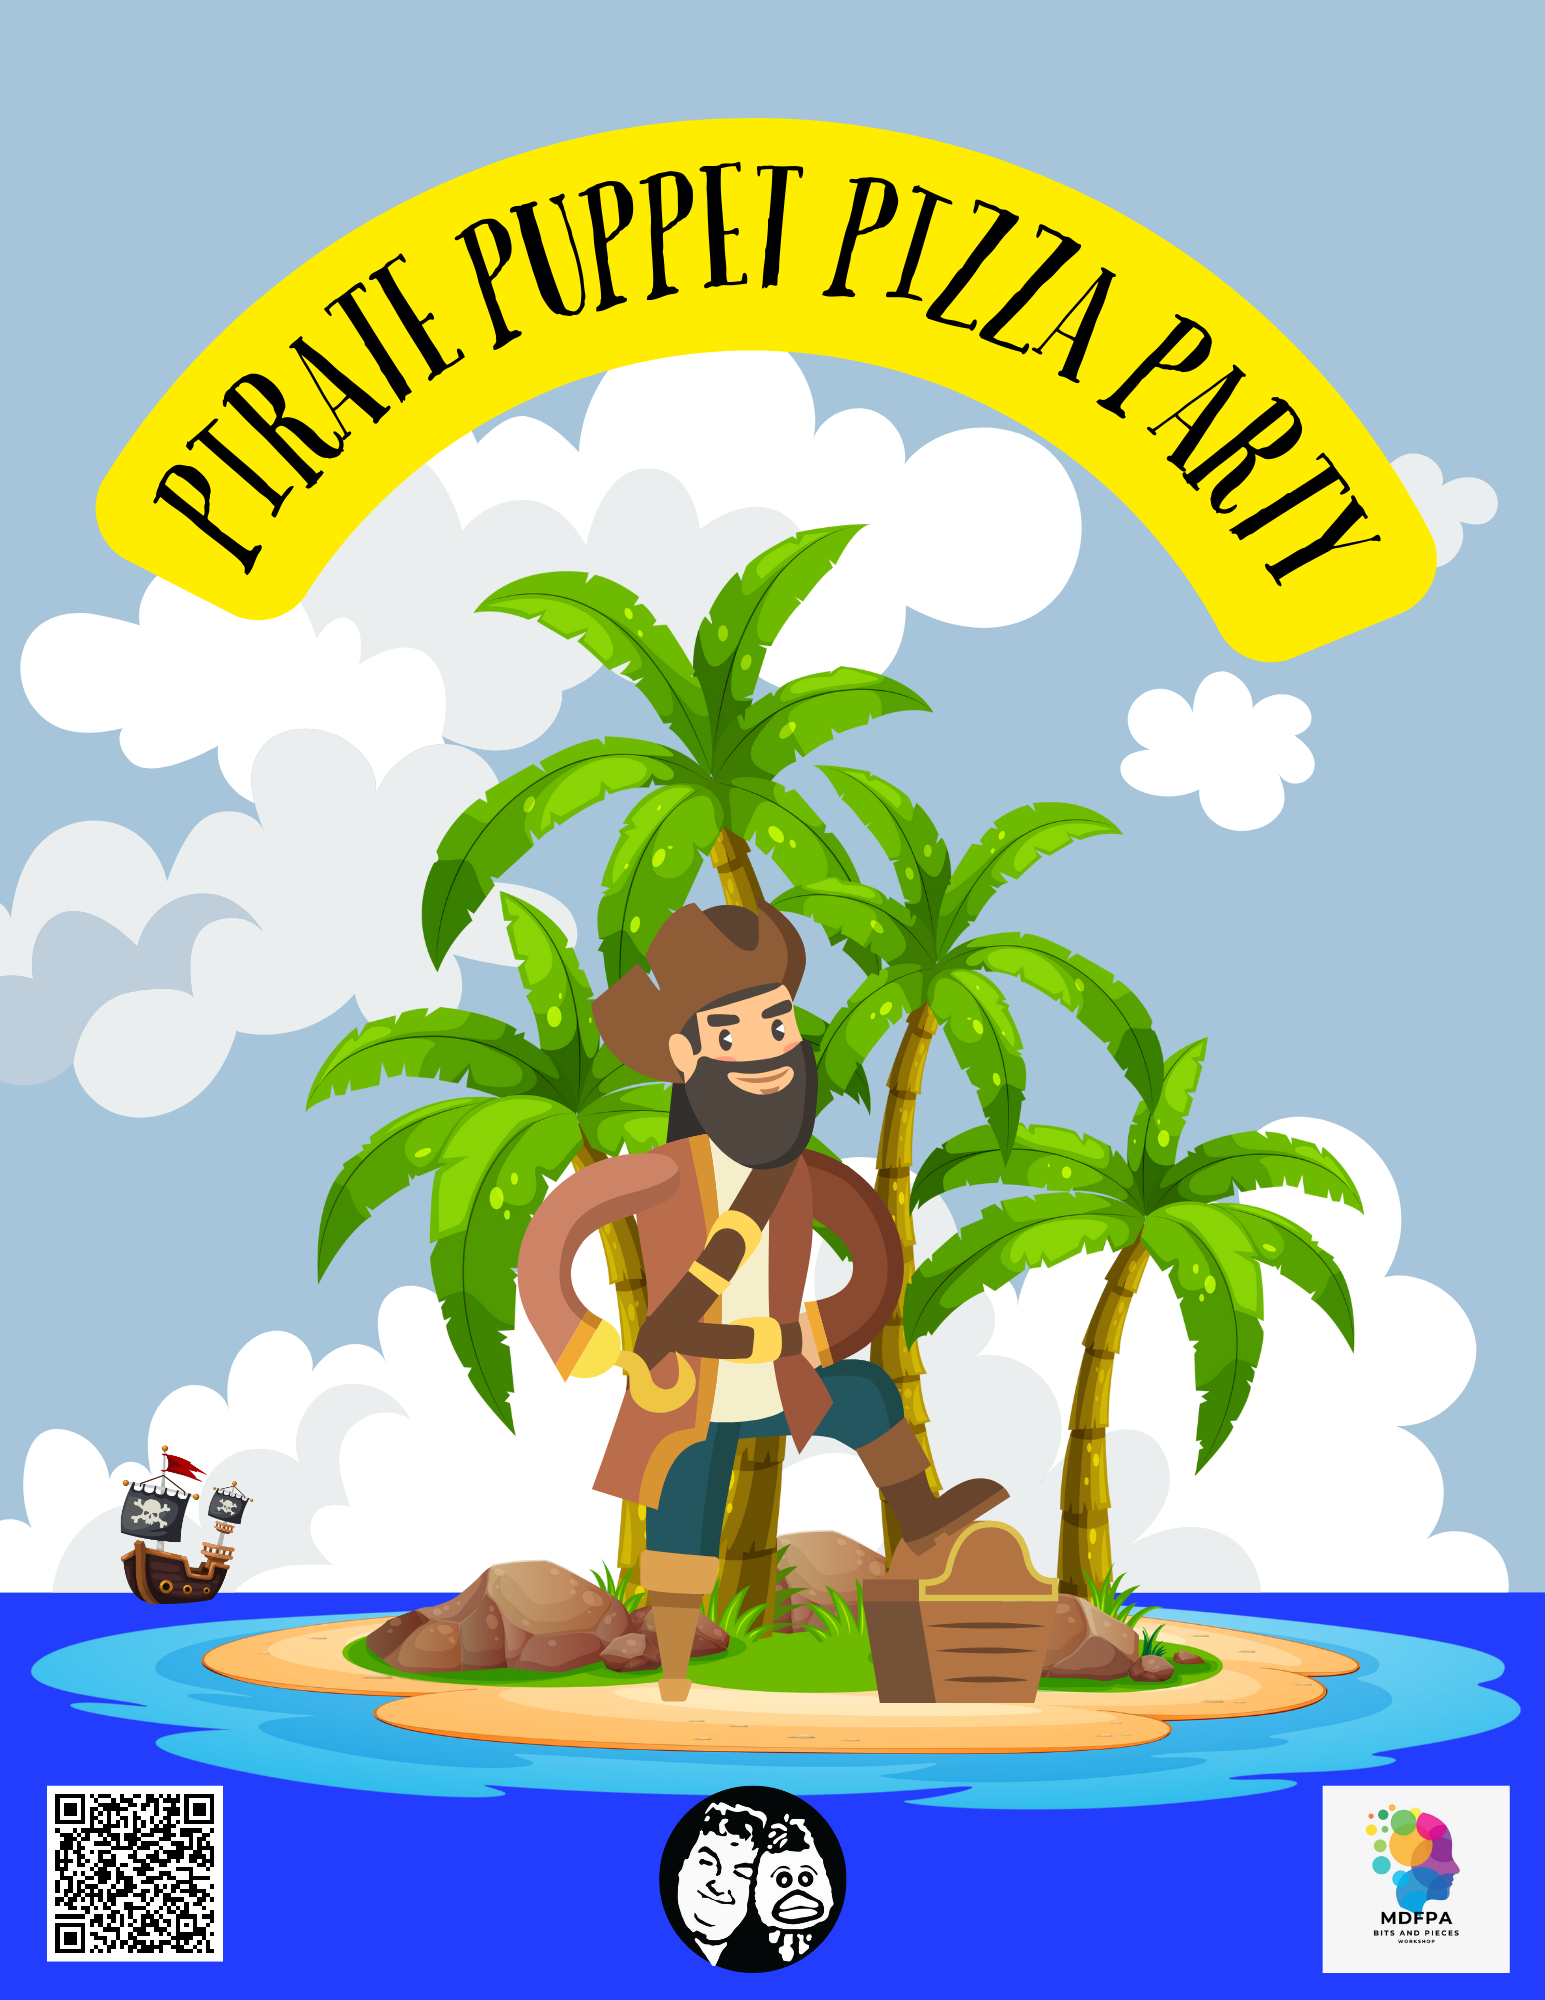 PIRATE PUPPET PIZZA PARTY Kit (1).png